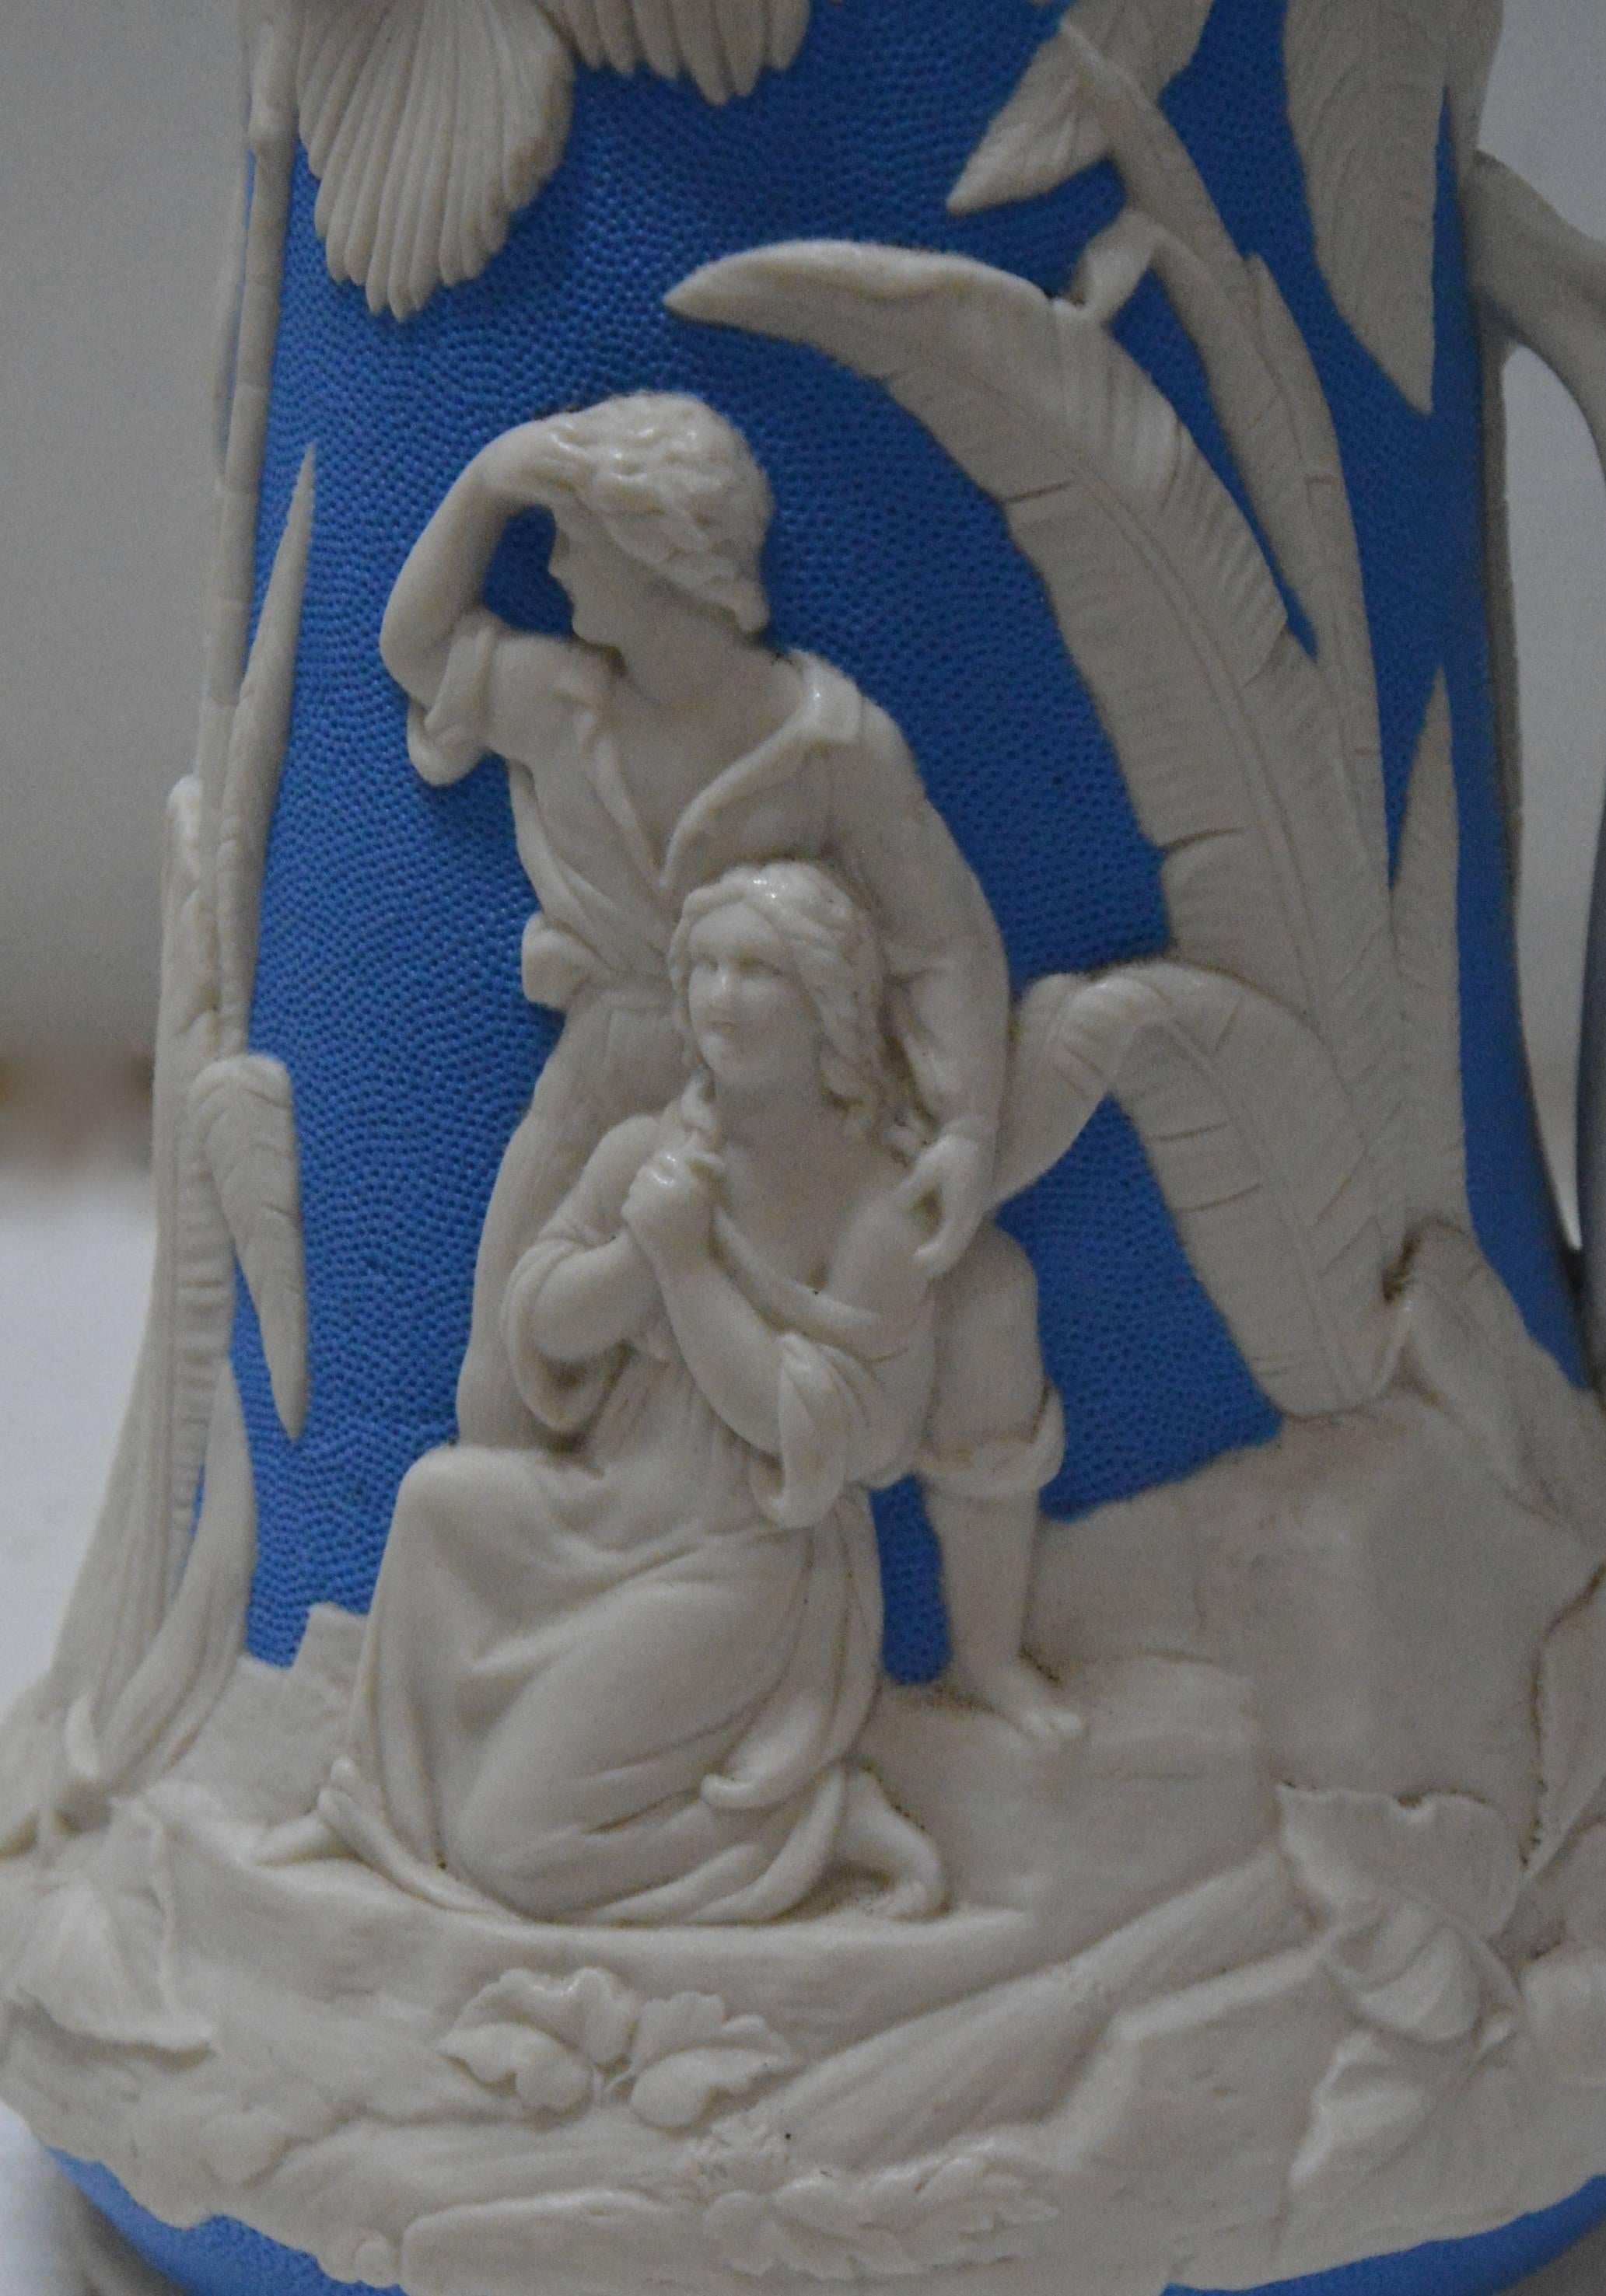 A beautiful molded earthenware pitcher made by the Jones and Walley Co. of Cobridge, Stoke-on-Trent, England. The piece features people in a tropical scene. The vibrant blue and white are done in high relief with amazing details. The pitcher is